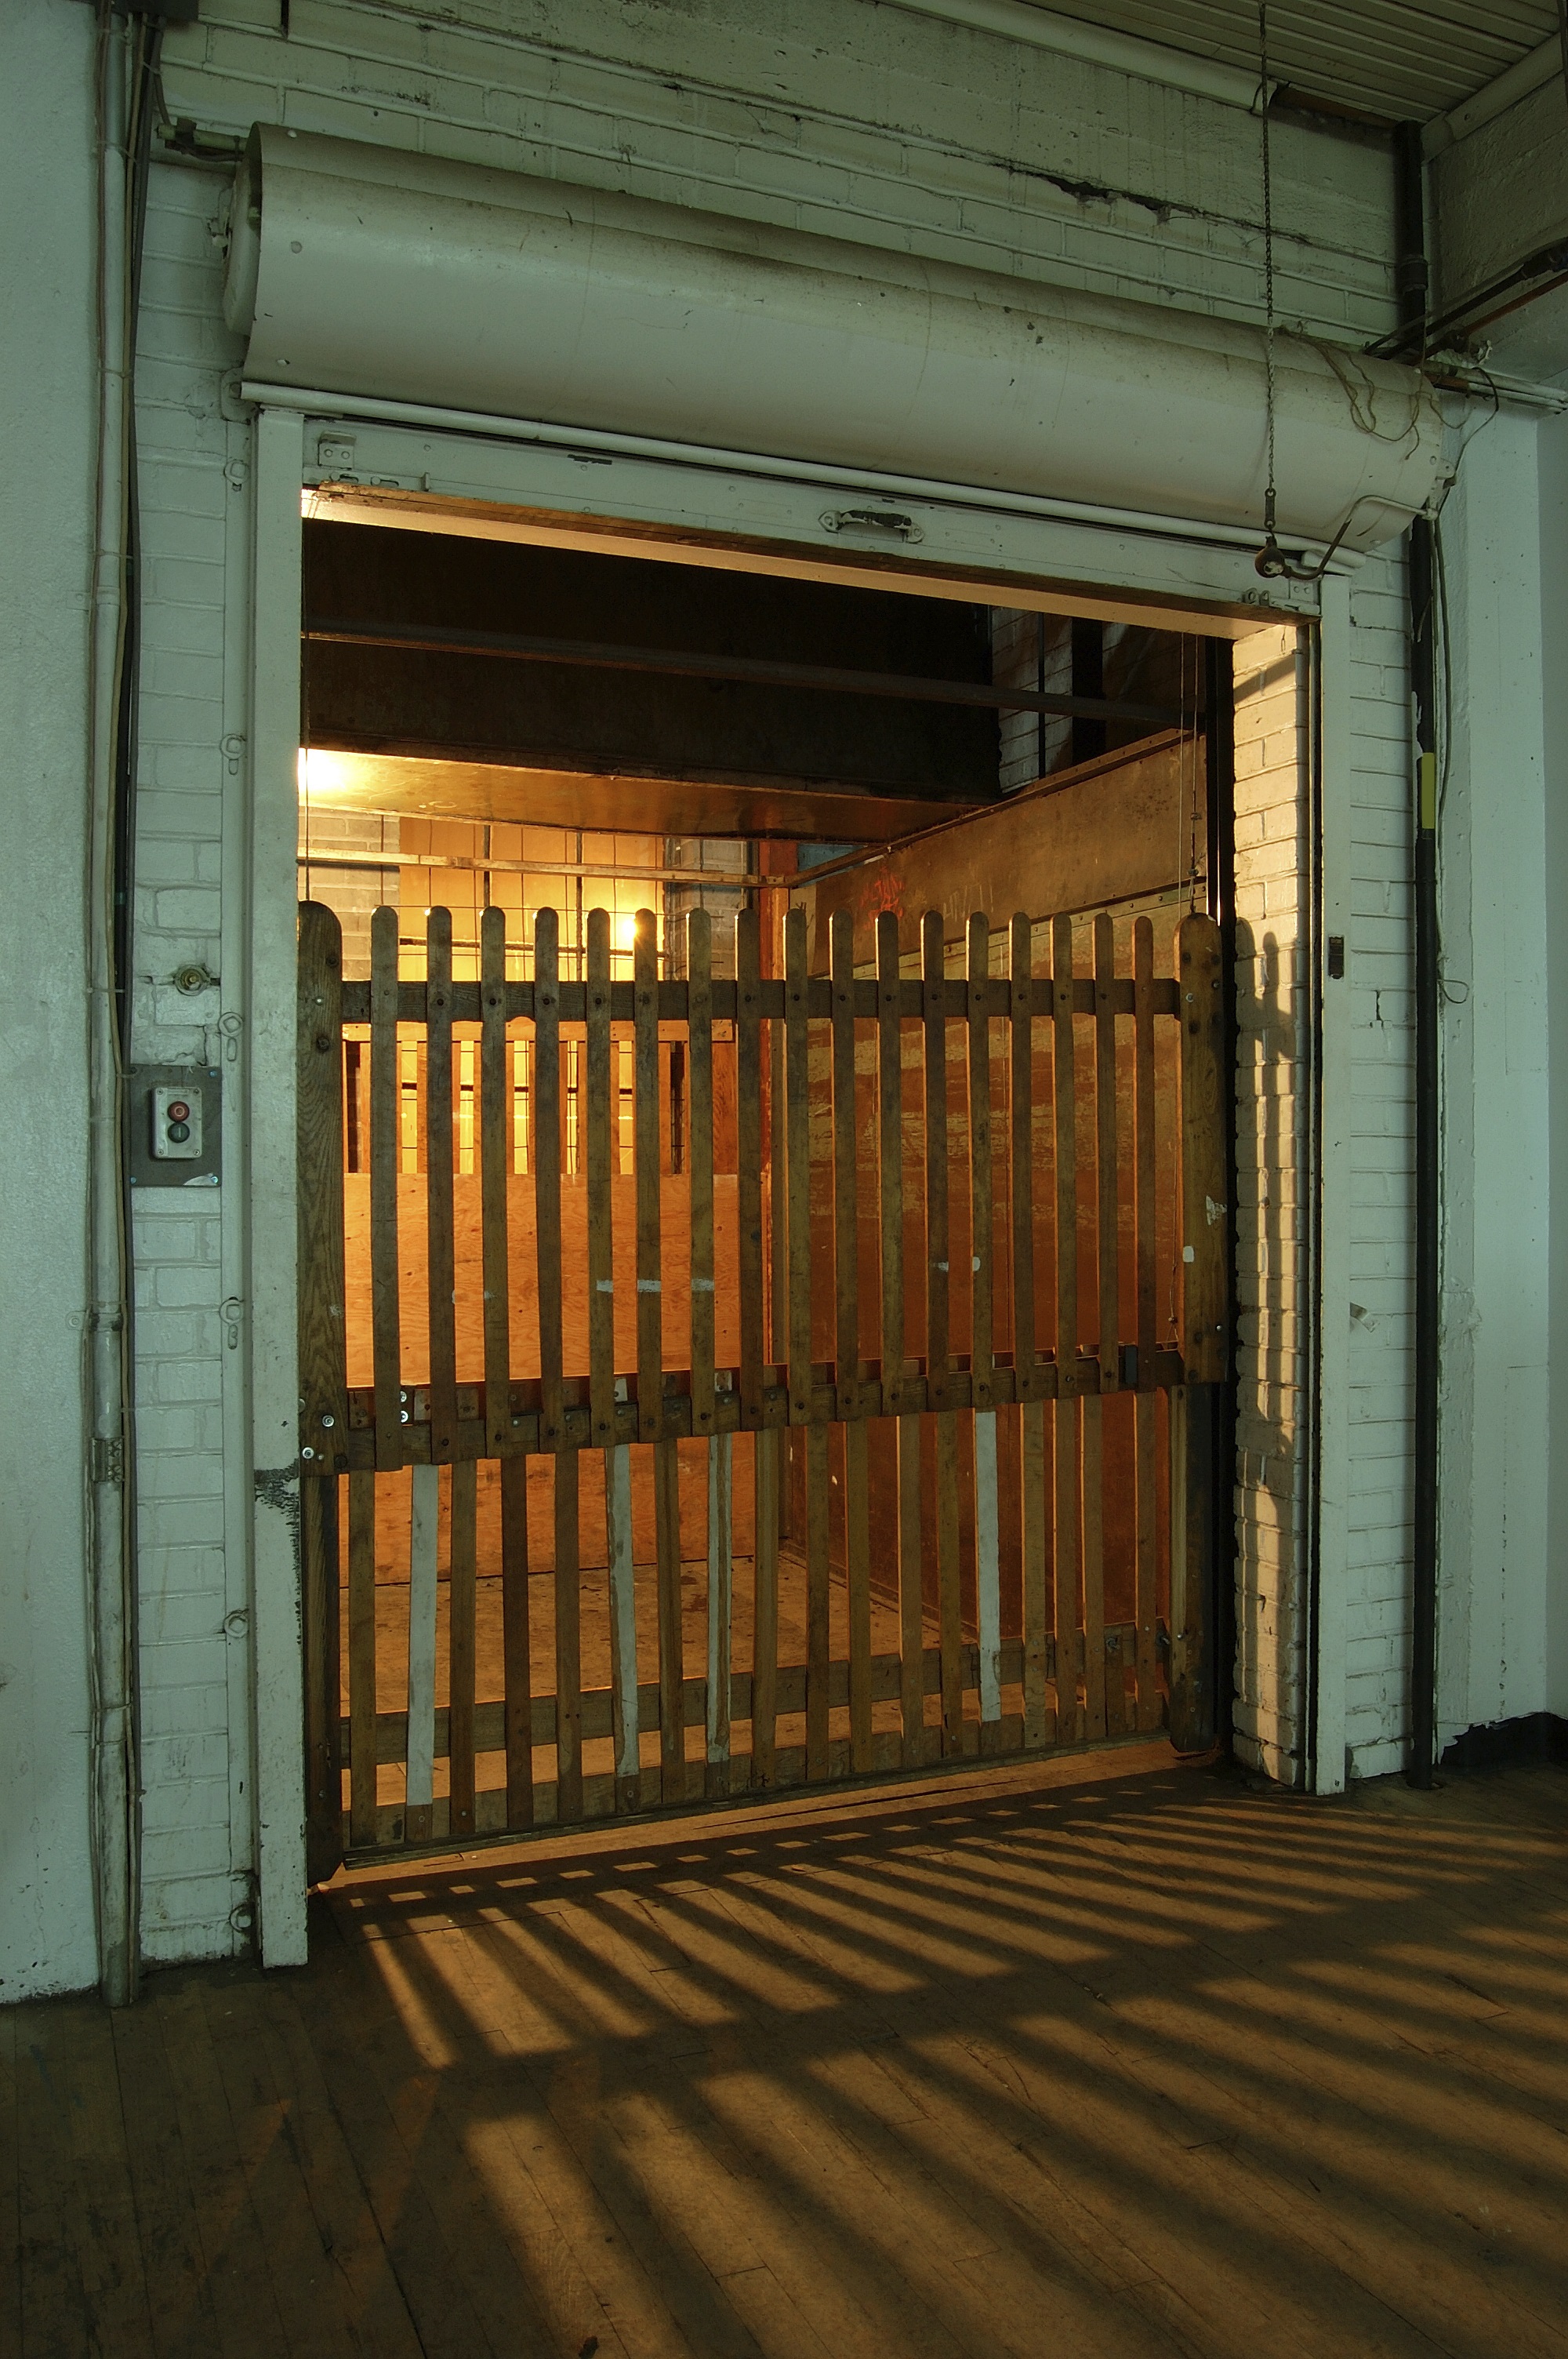 Freight Elevator shooting video in new york city